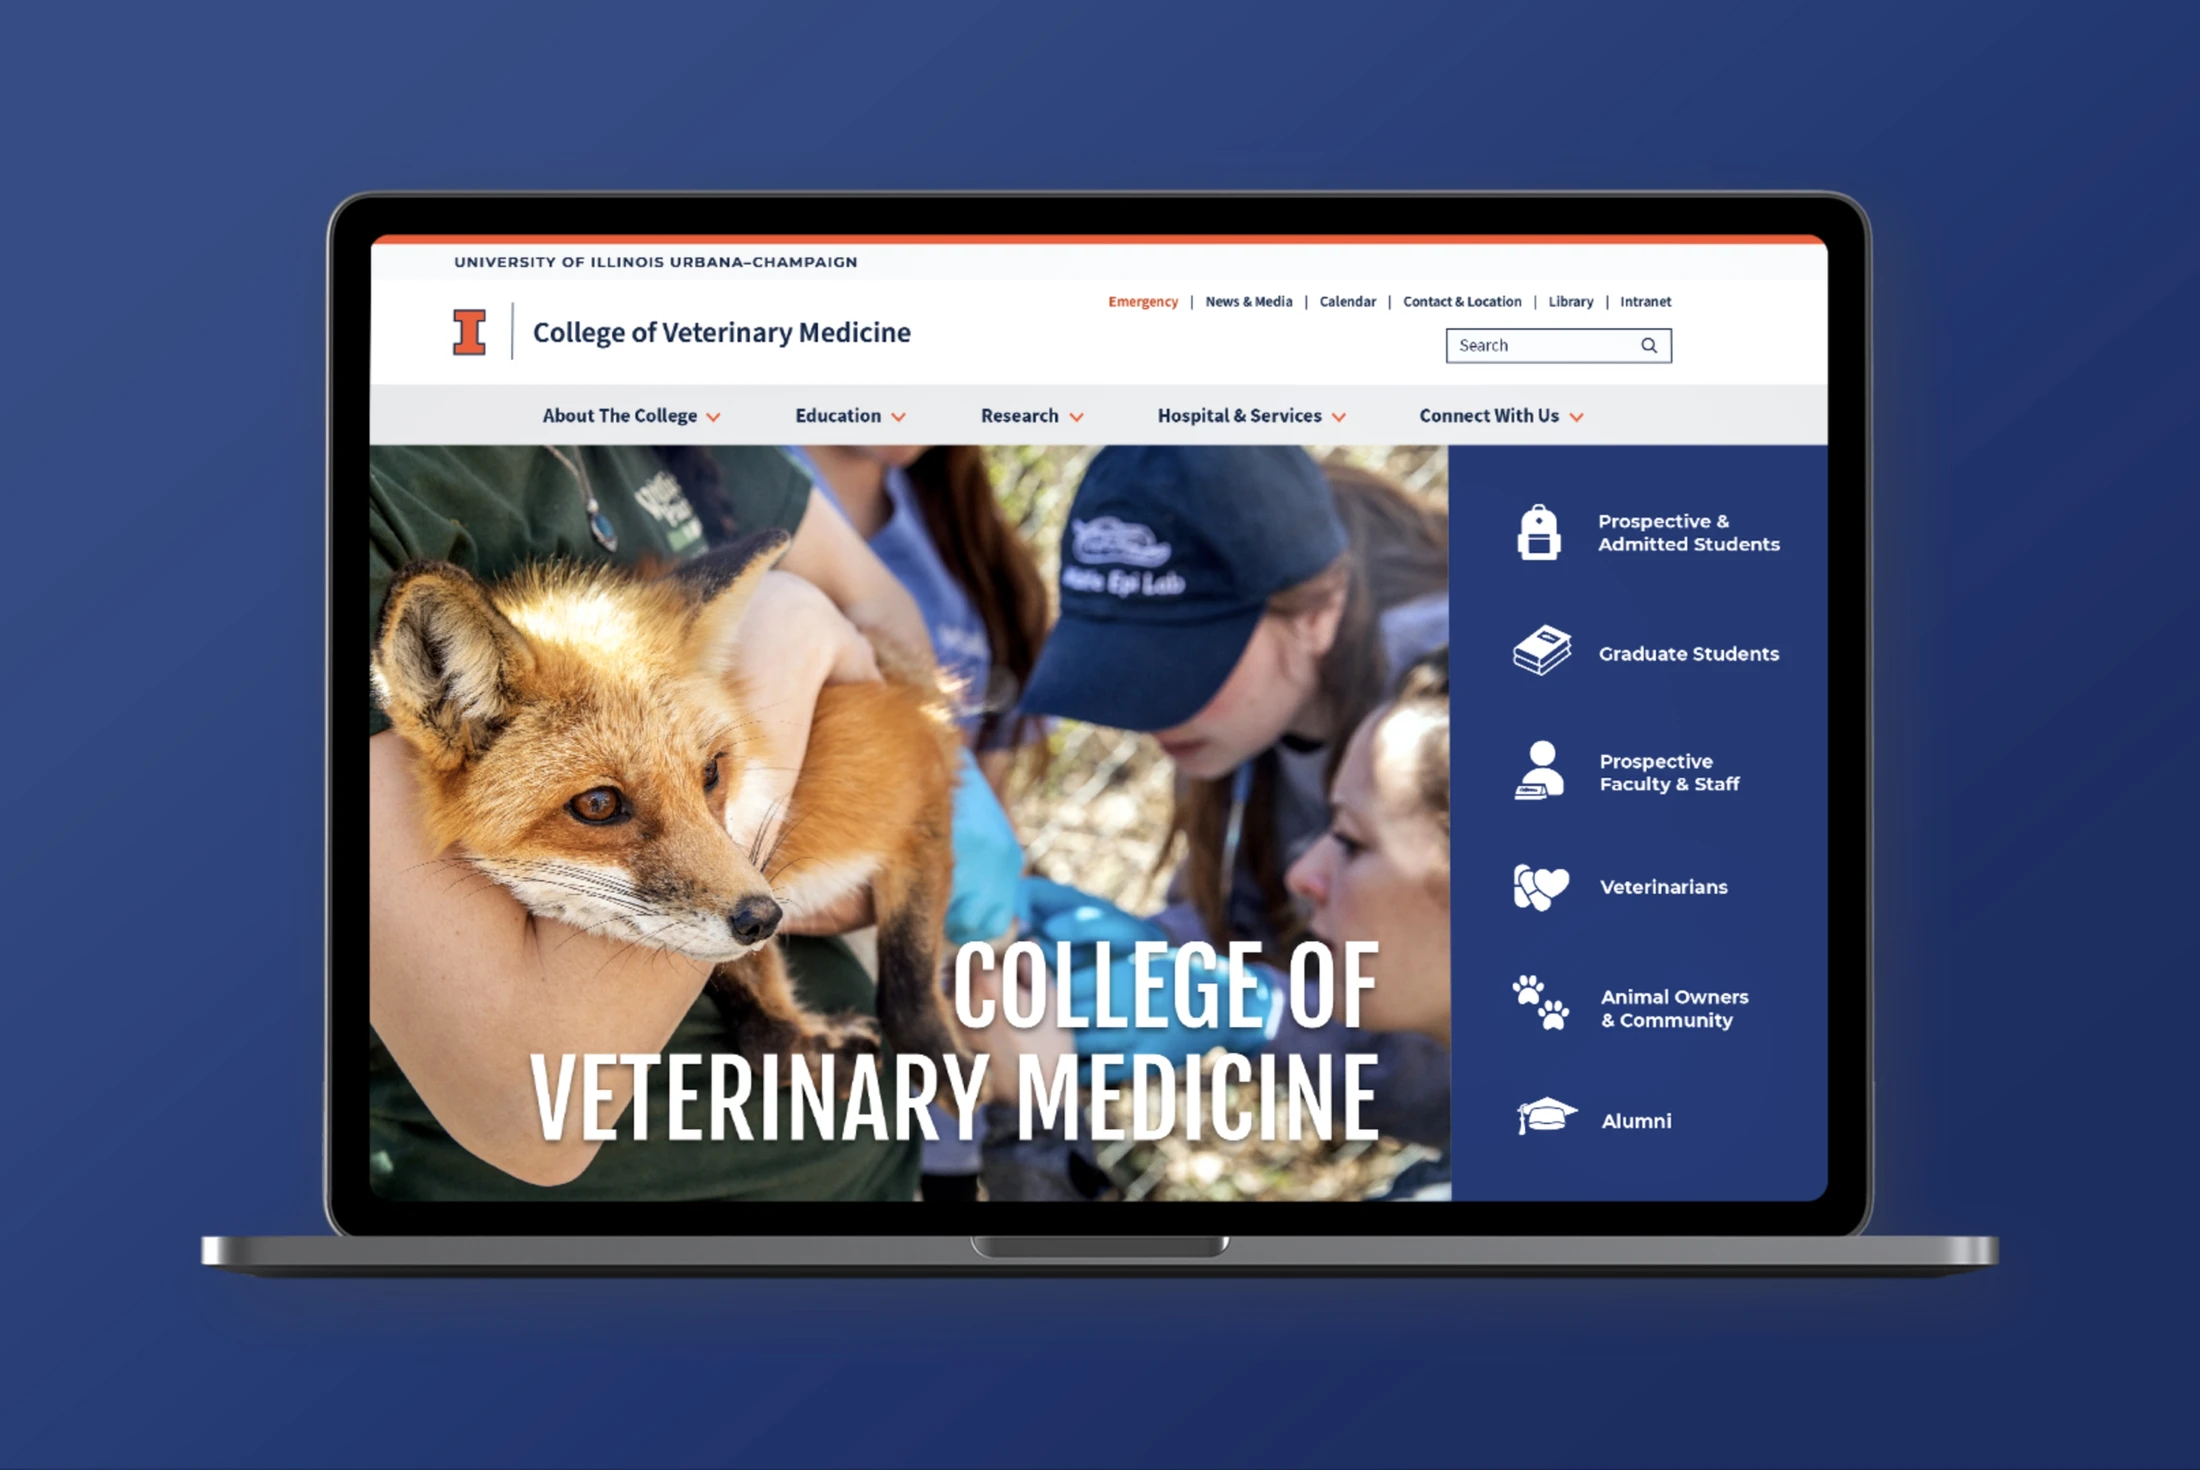 The college of veterinary medicine website is displayed on a laptop.